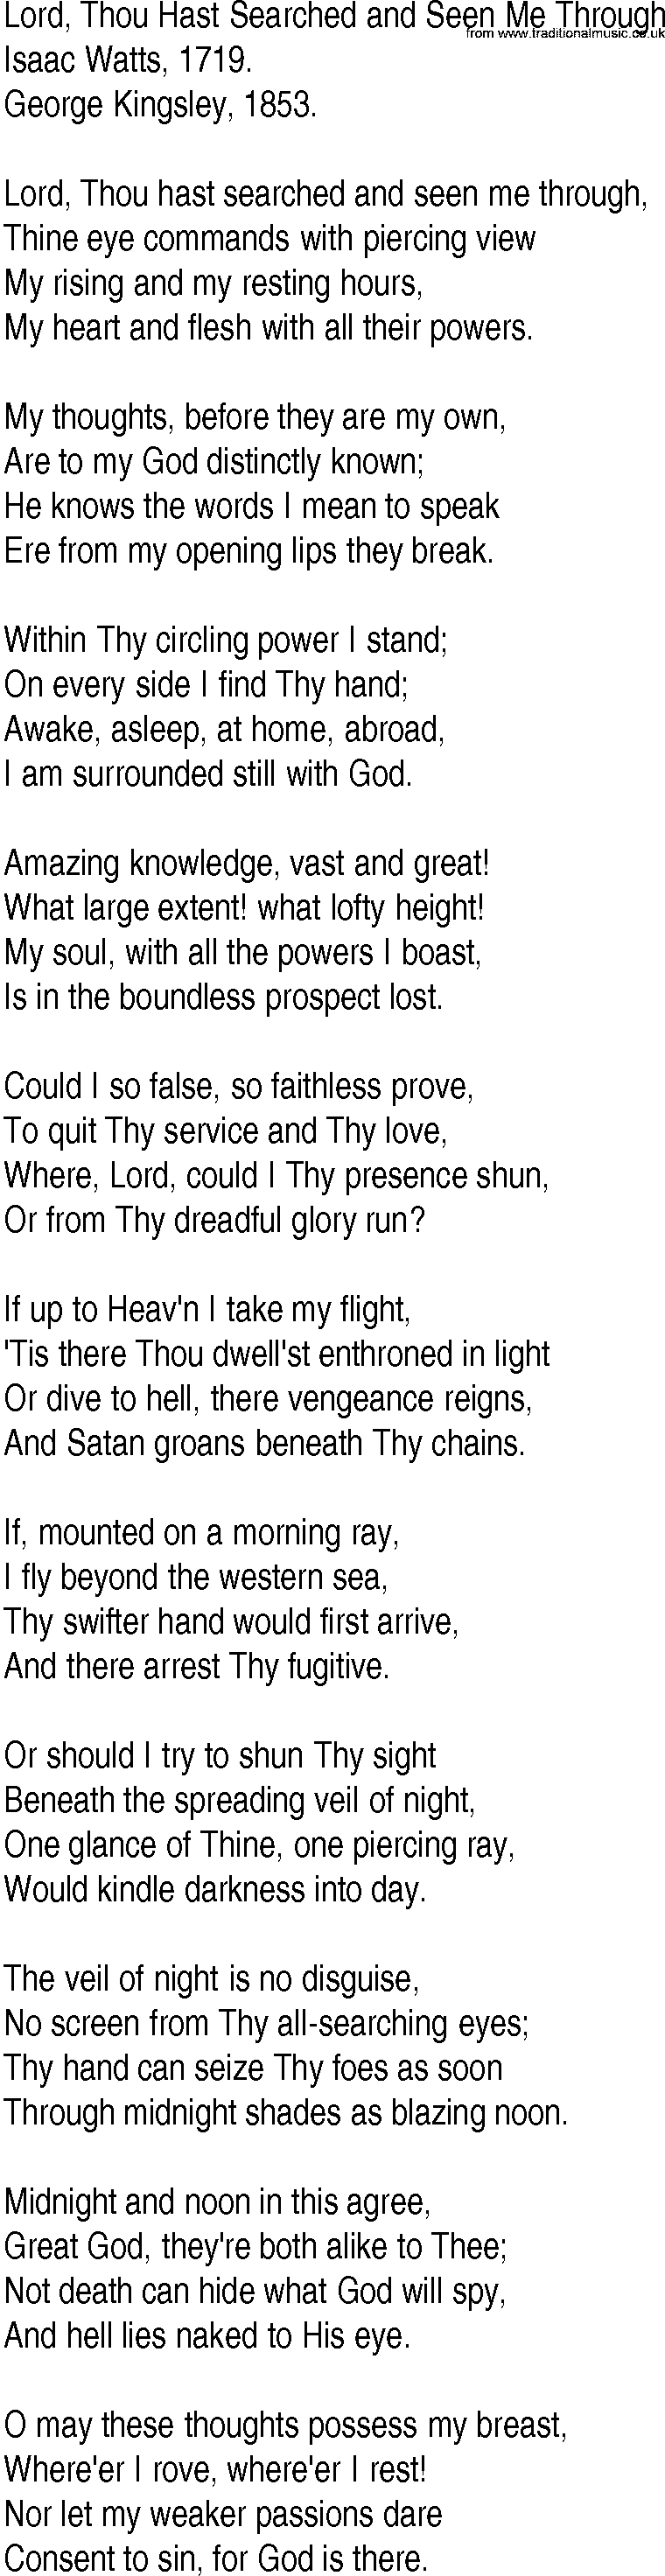 Hymn and Gospel Song: Lord, Thou Hast Searched and Seen Me Through by Isaac Watts lyrics